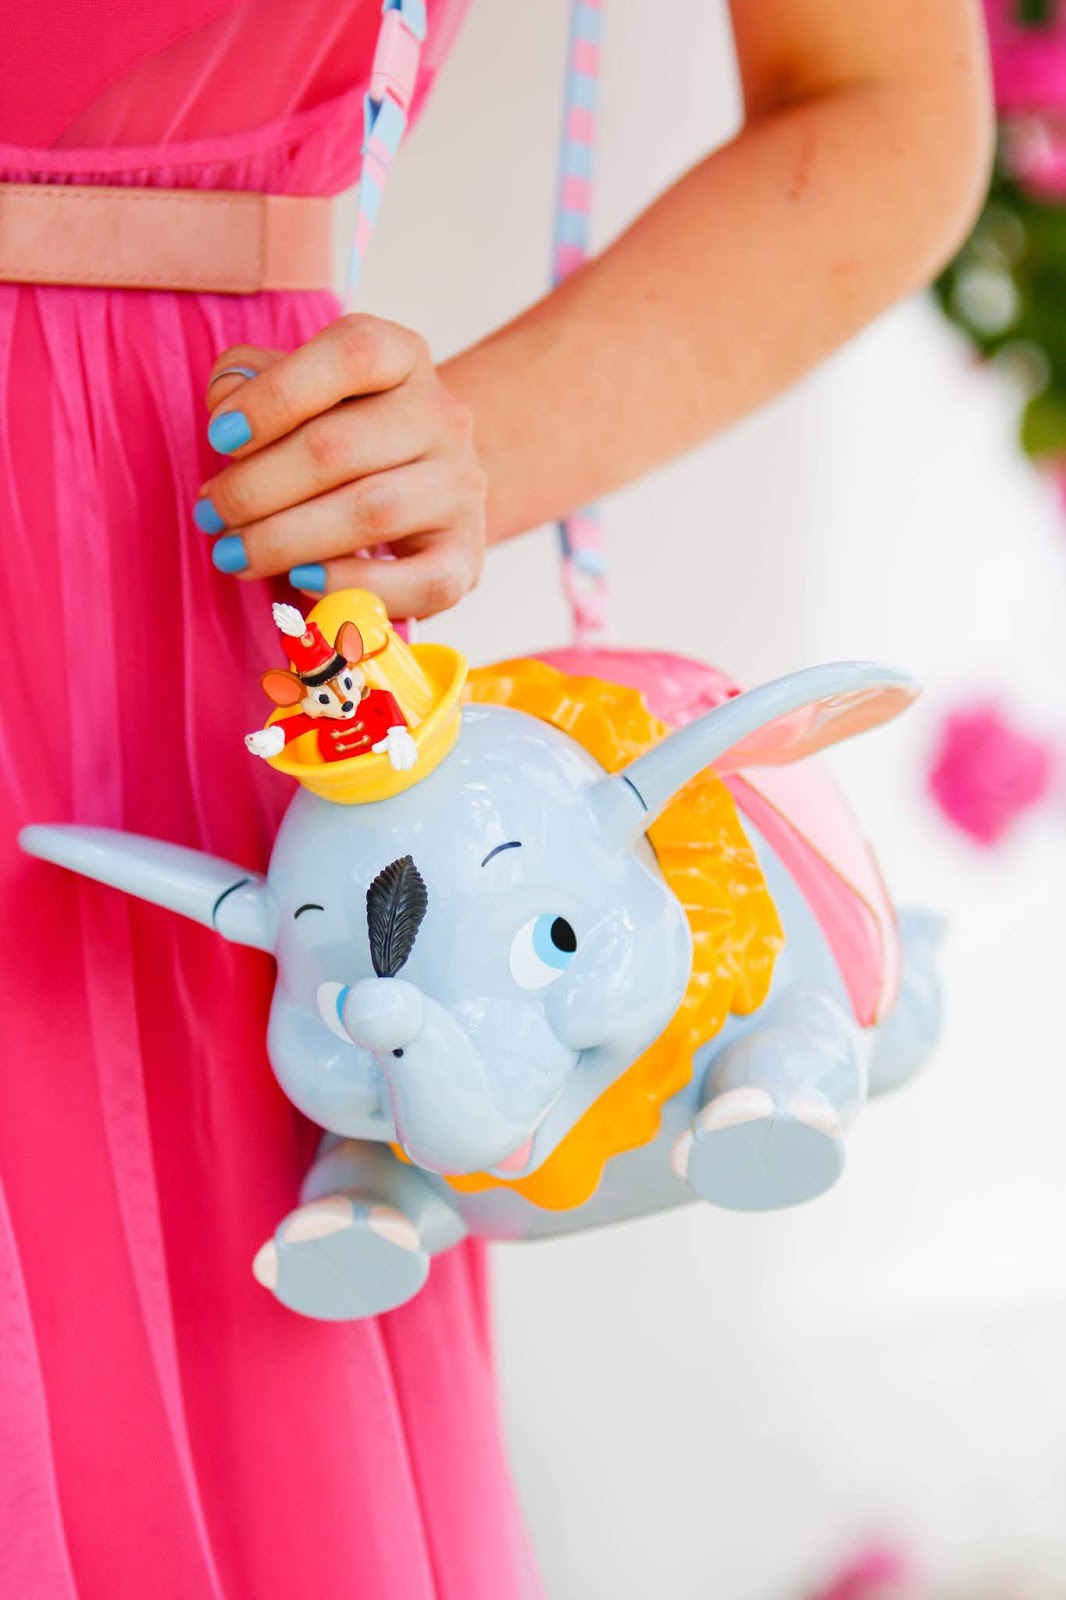 Cute Pink outfit with Dumbo popcorn bucket